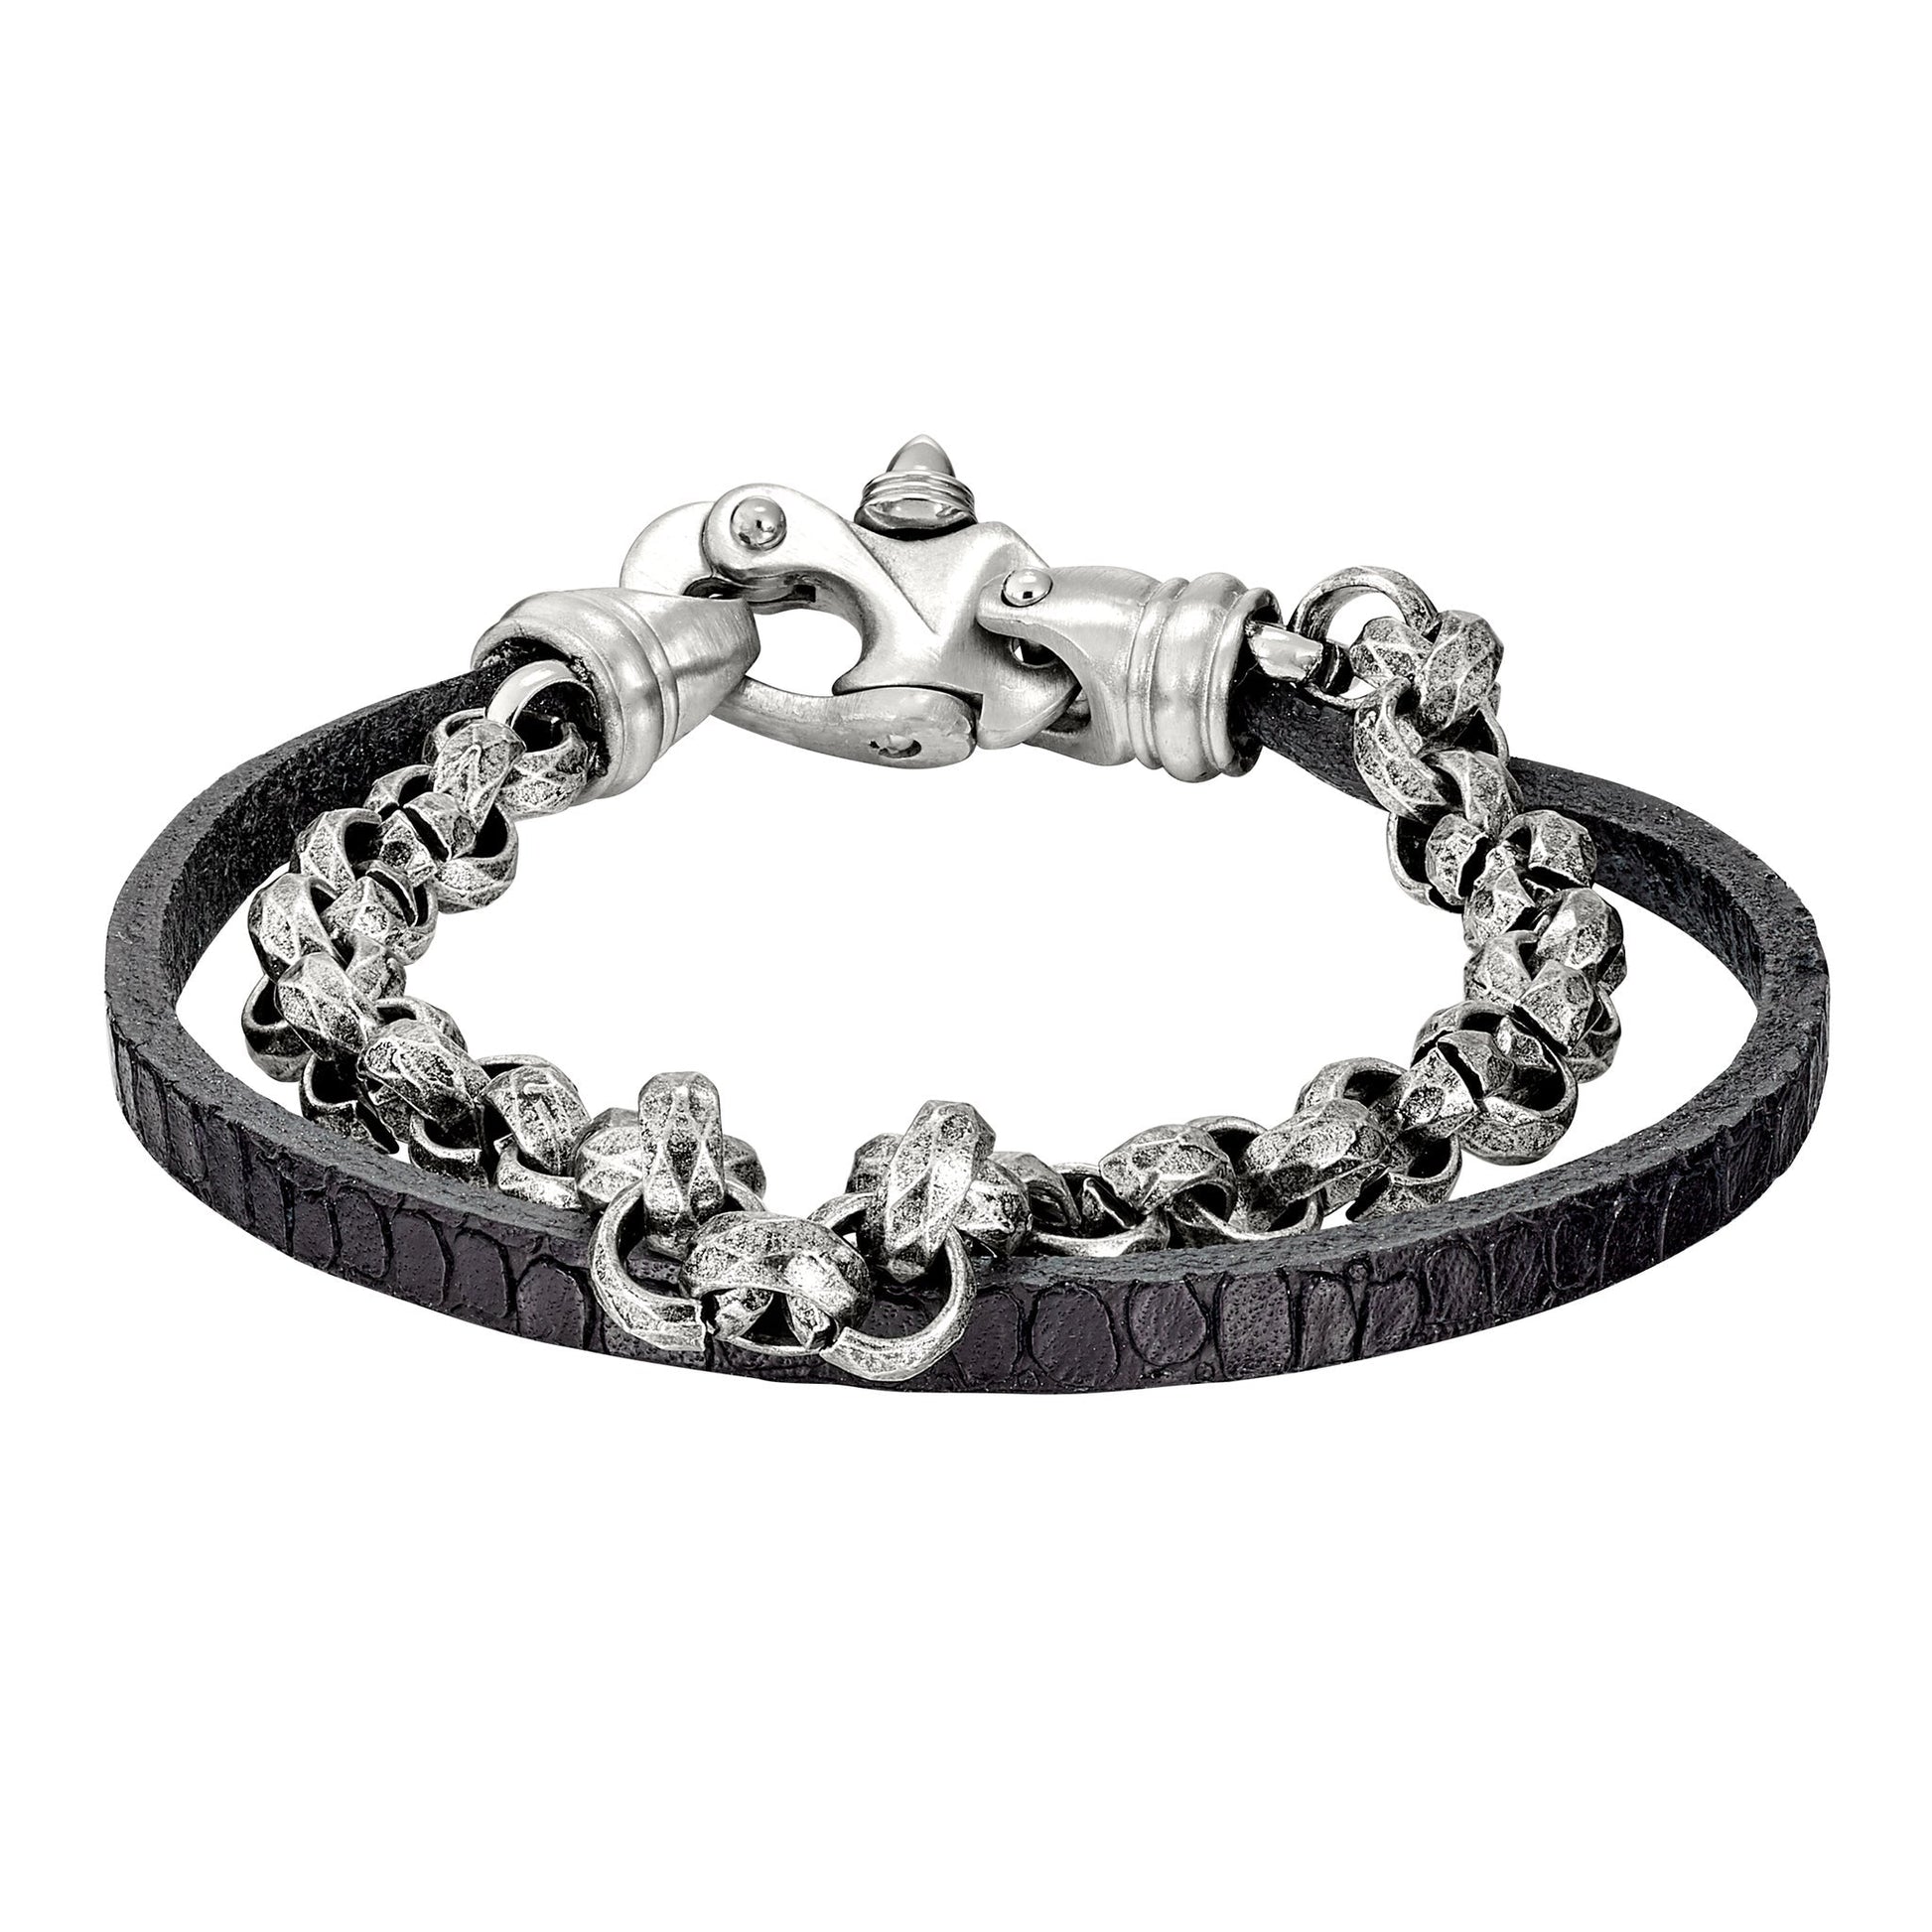 A black leather cord bracelet with large box link chain displayed on a neutral white background.